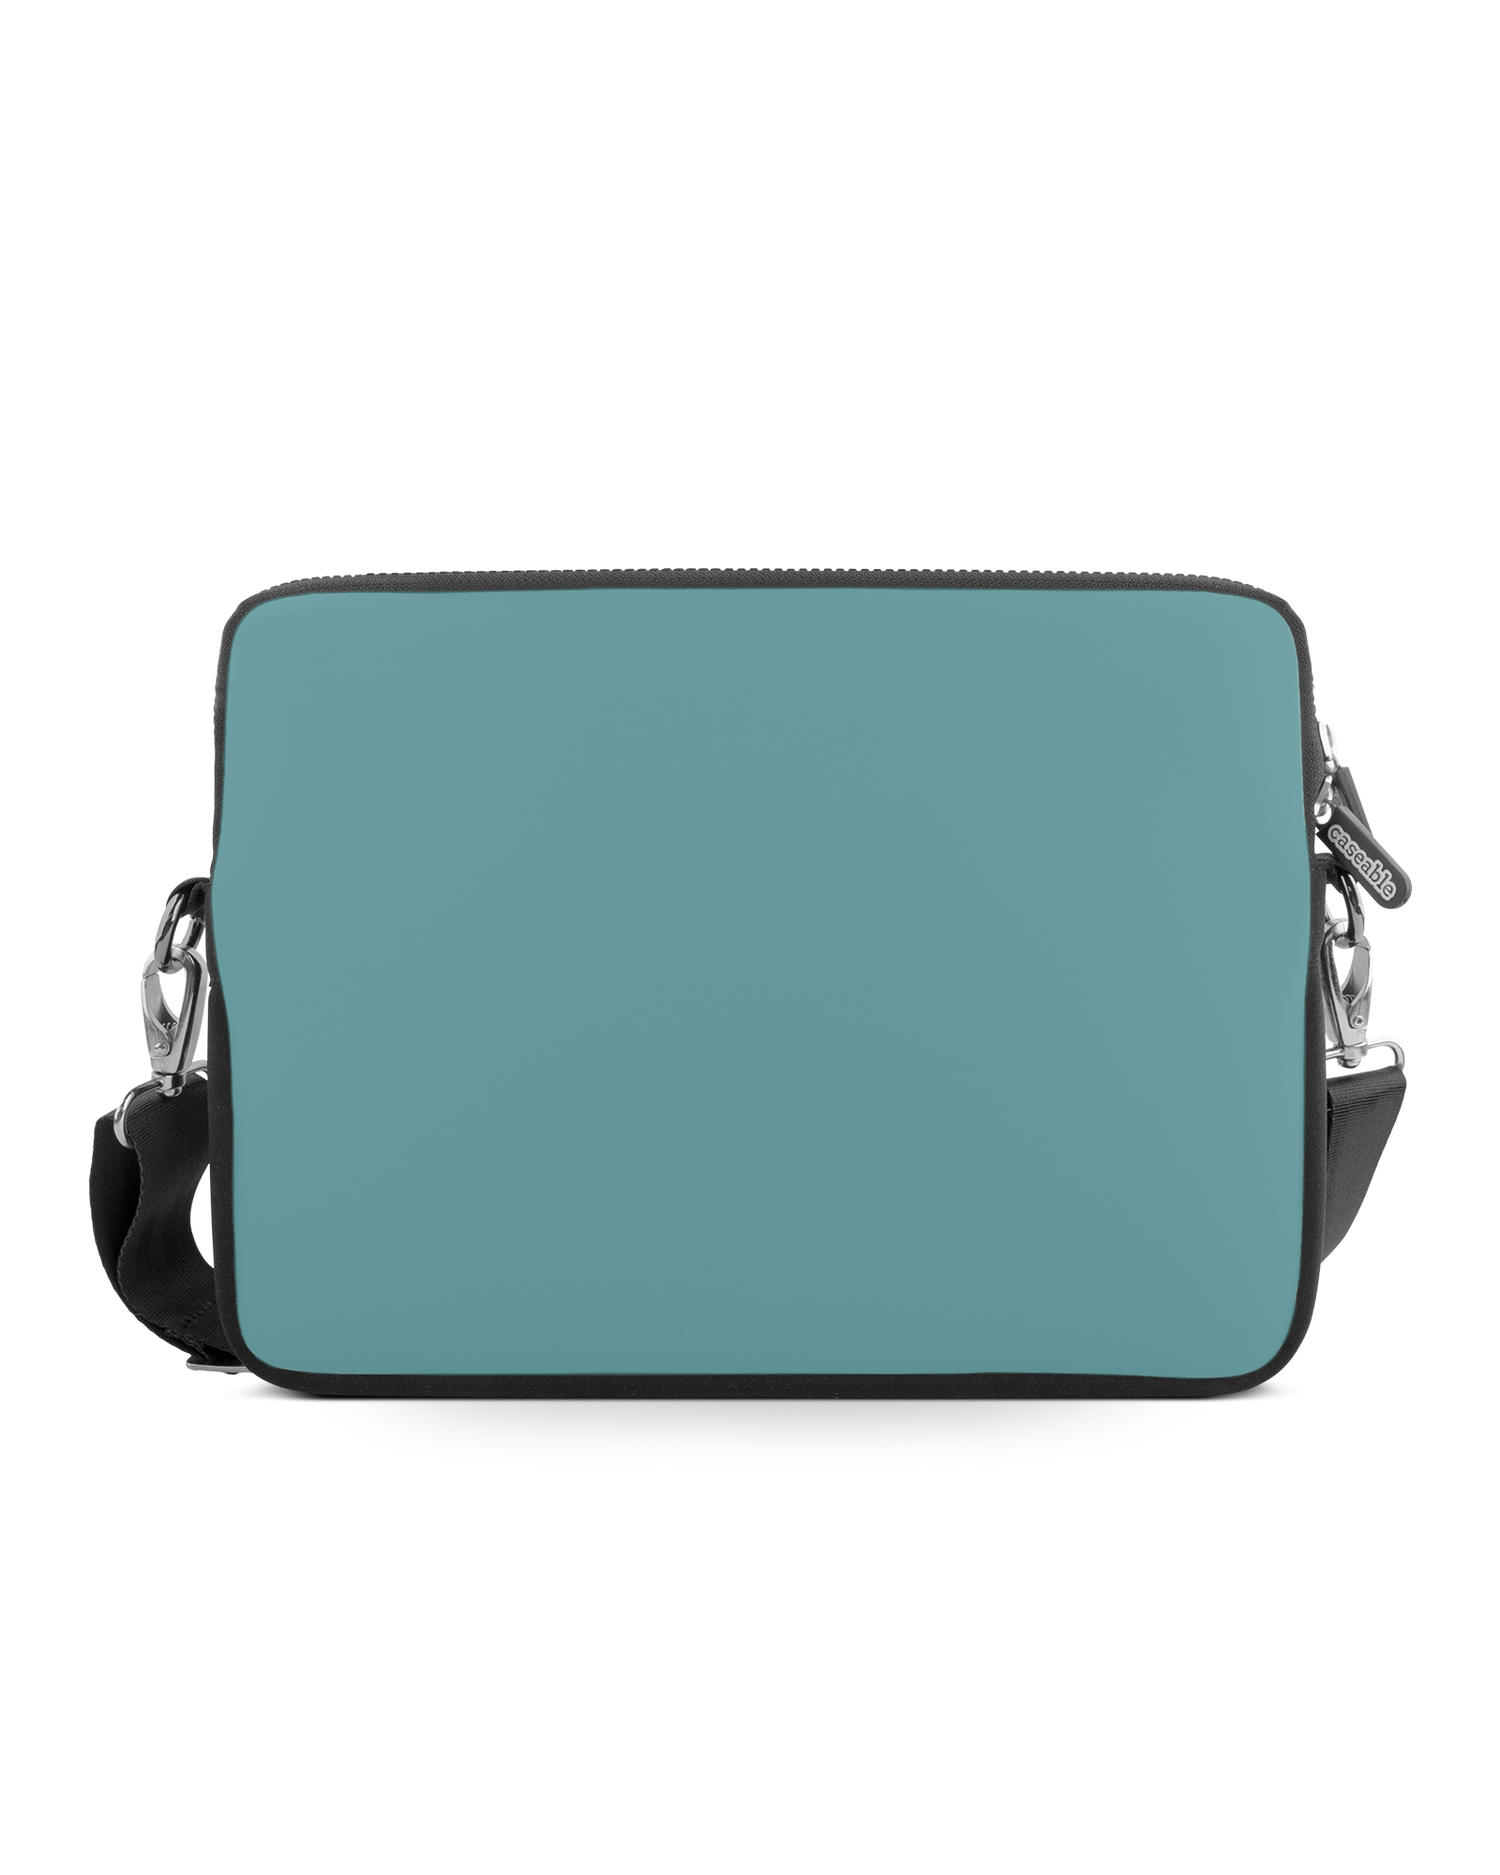 TURQUOISE Premium Laptop Bag 15 inch: Front View